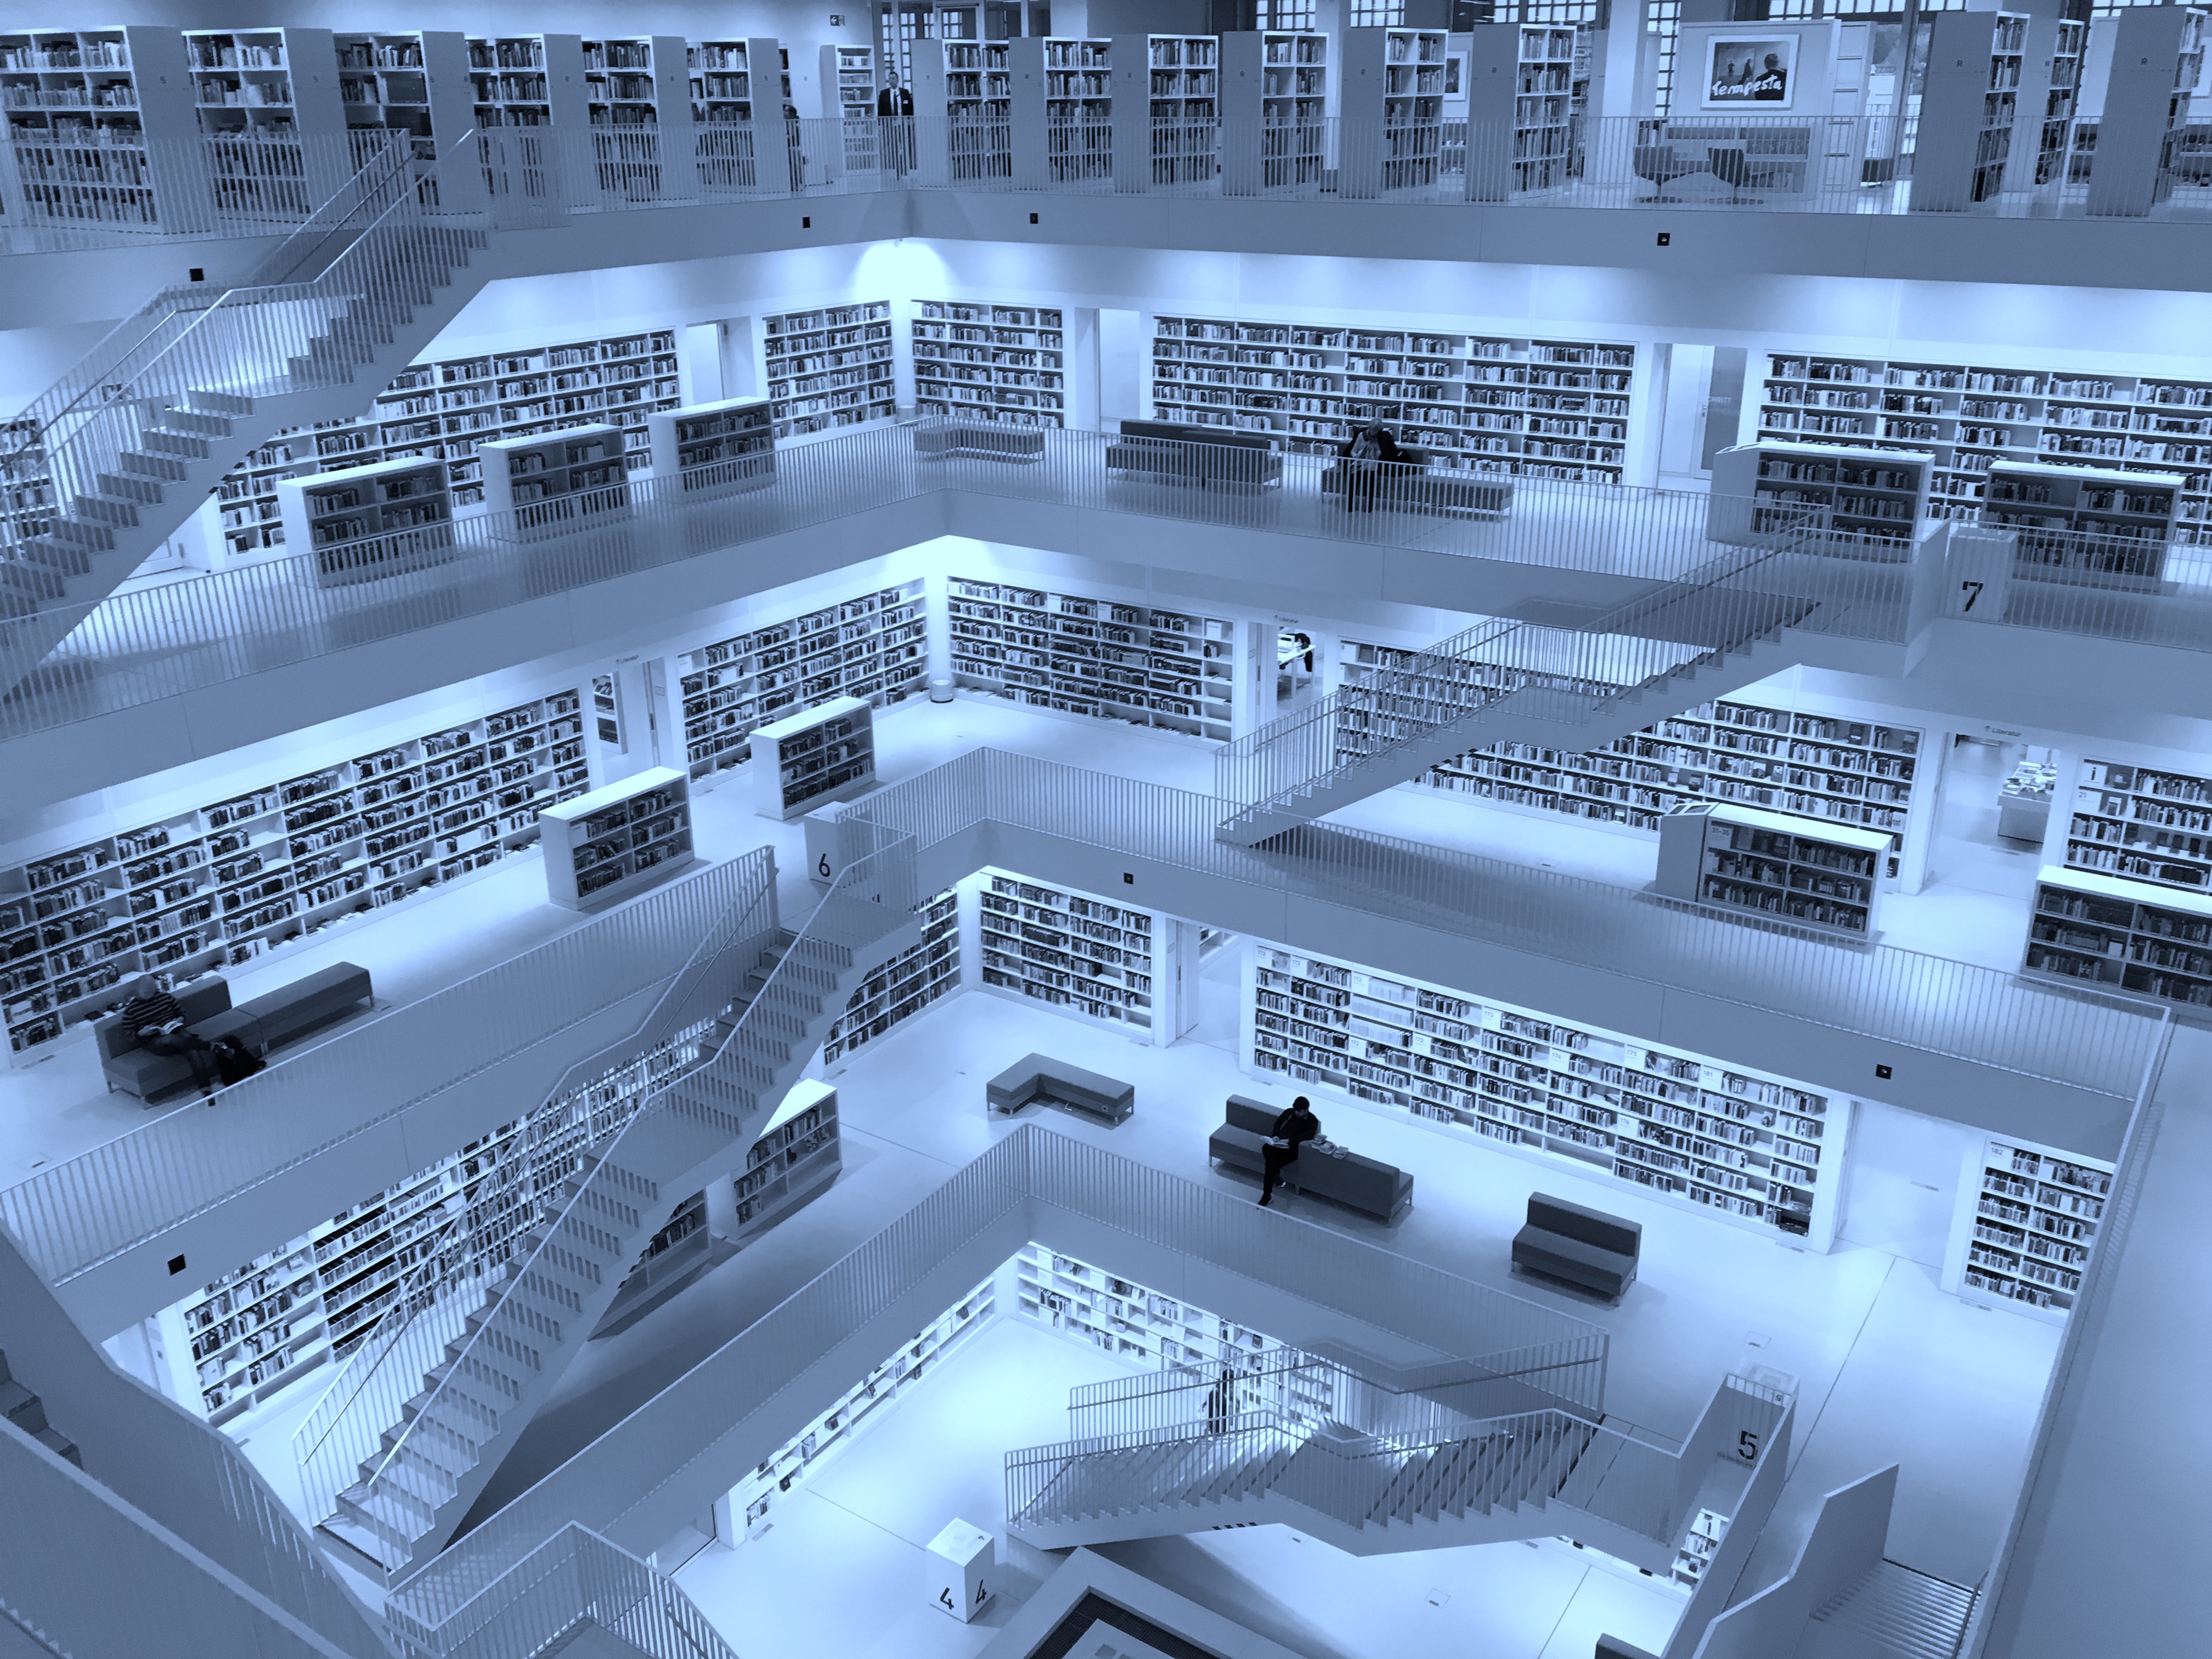 The inside of a geometric-looking library with many books and staircases cast in blue light